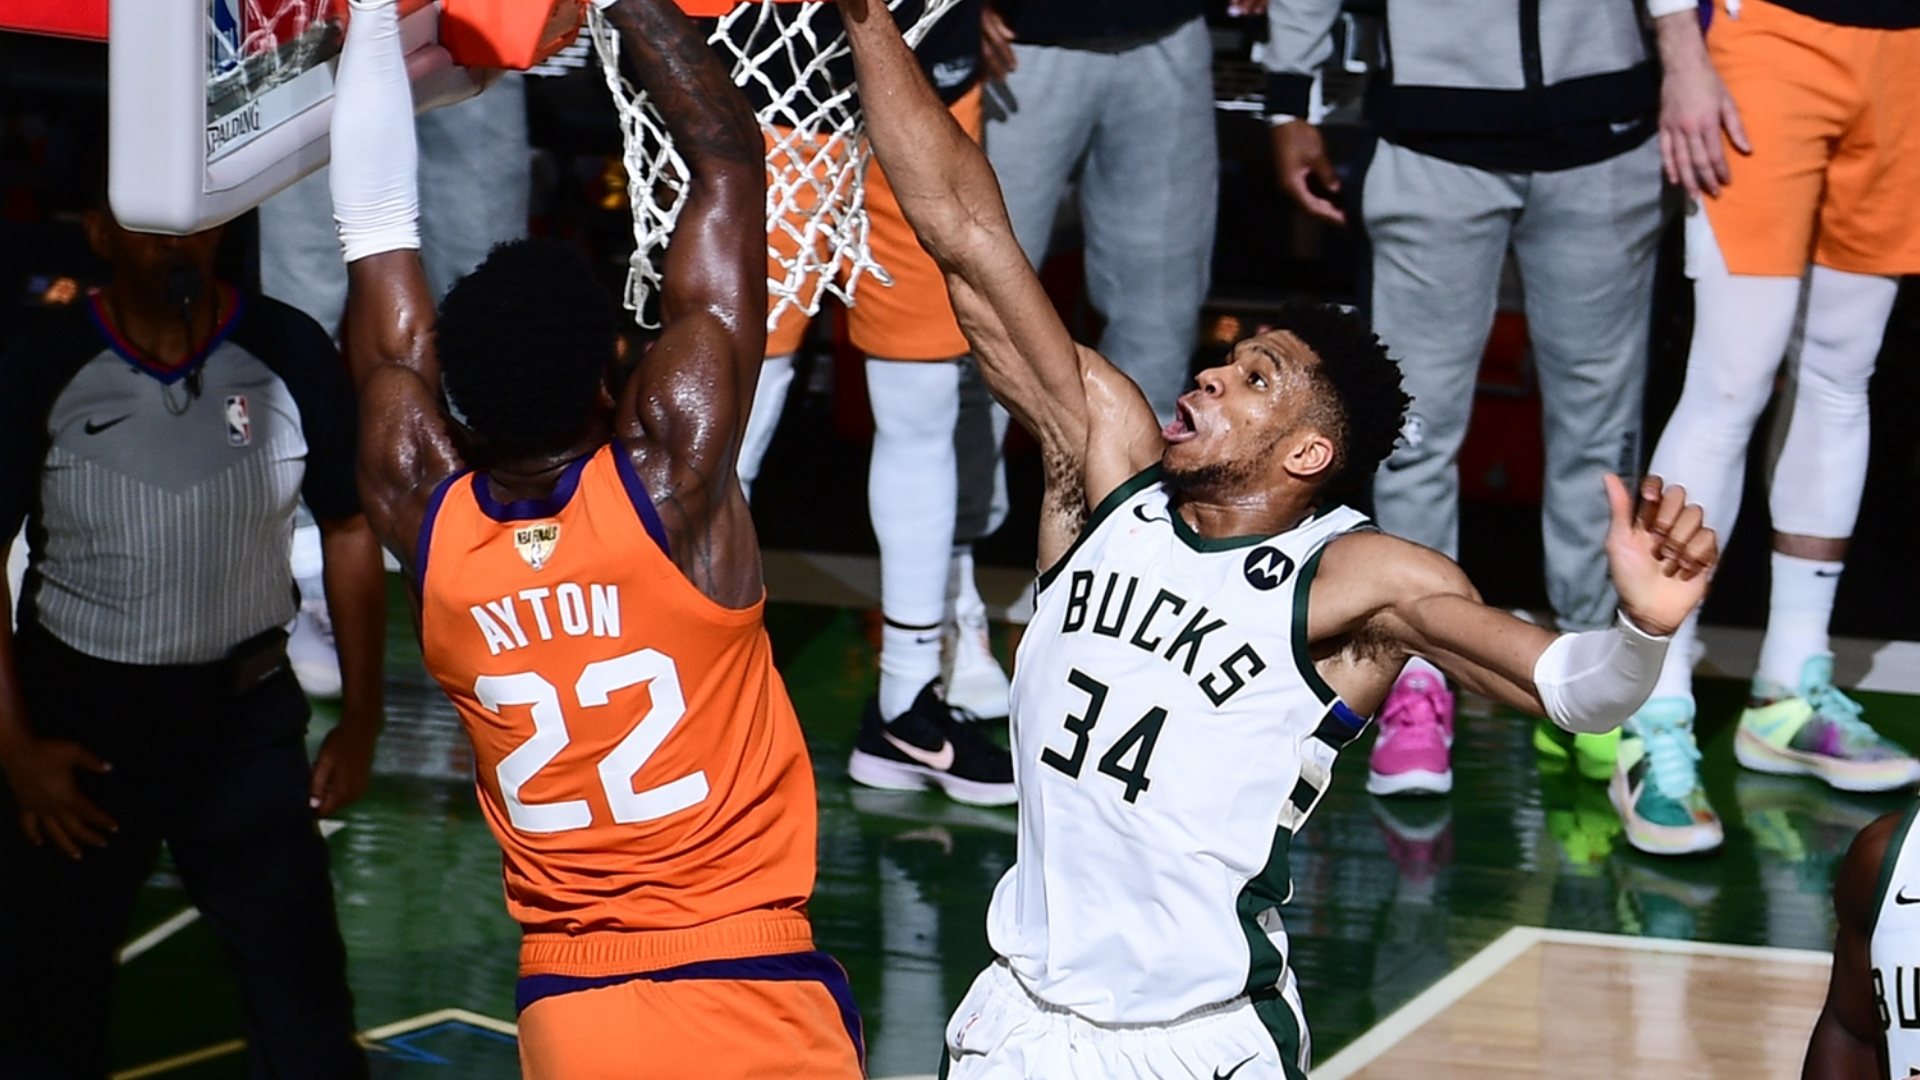 NBA Finals 2021: Giannis Antetokounmpo delivers signature Finals moment with clutch block in Game 4. NBA.com Canada. The official site of